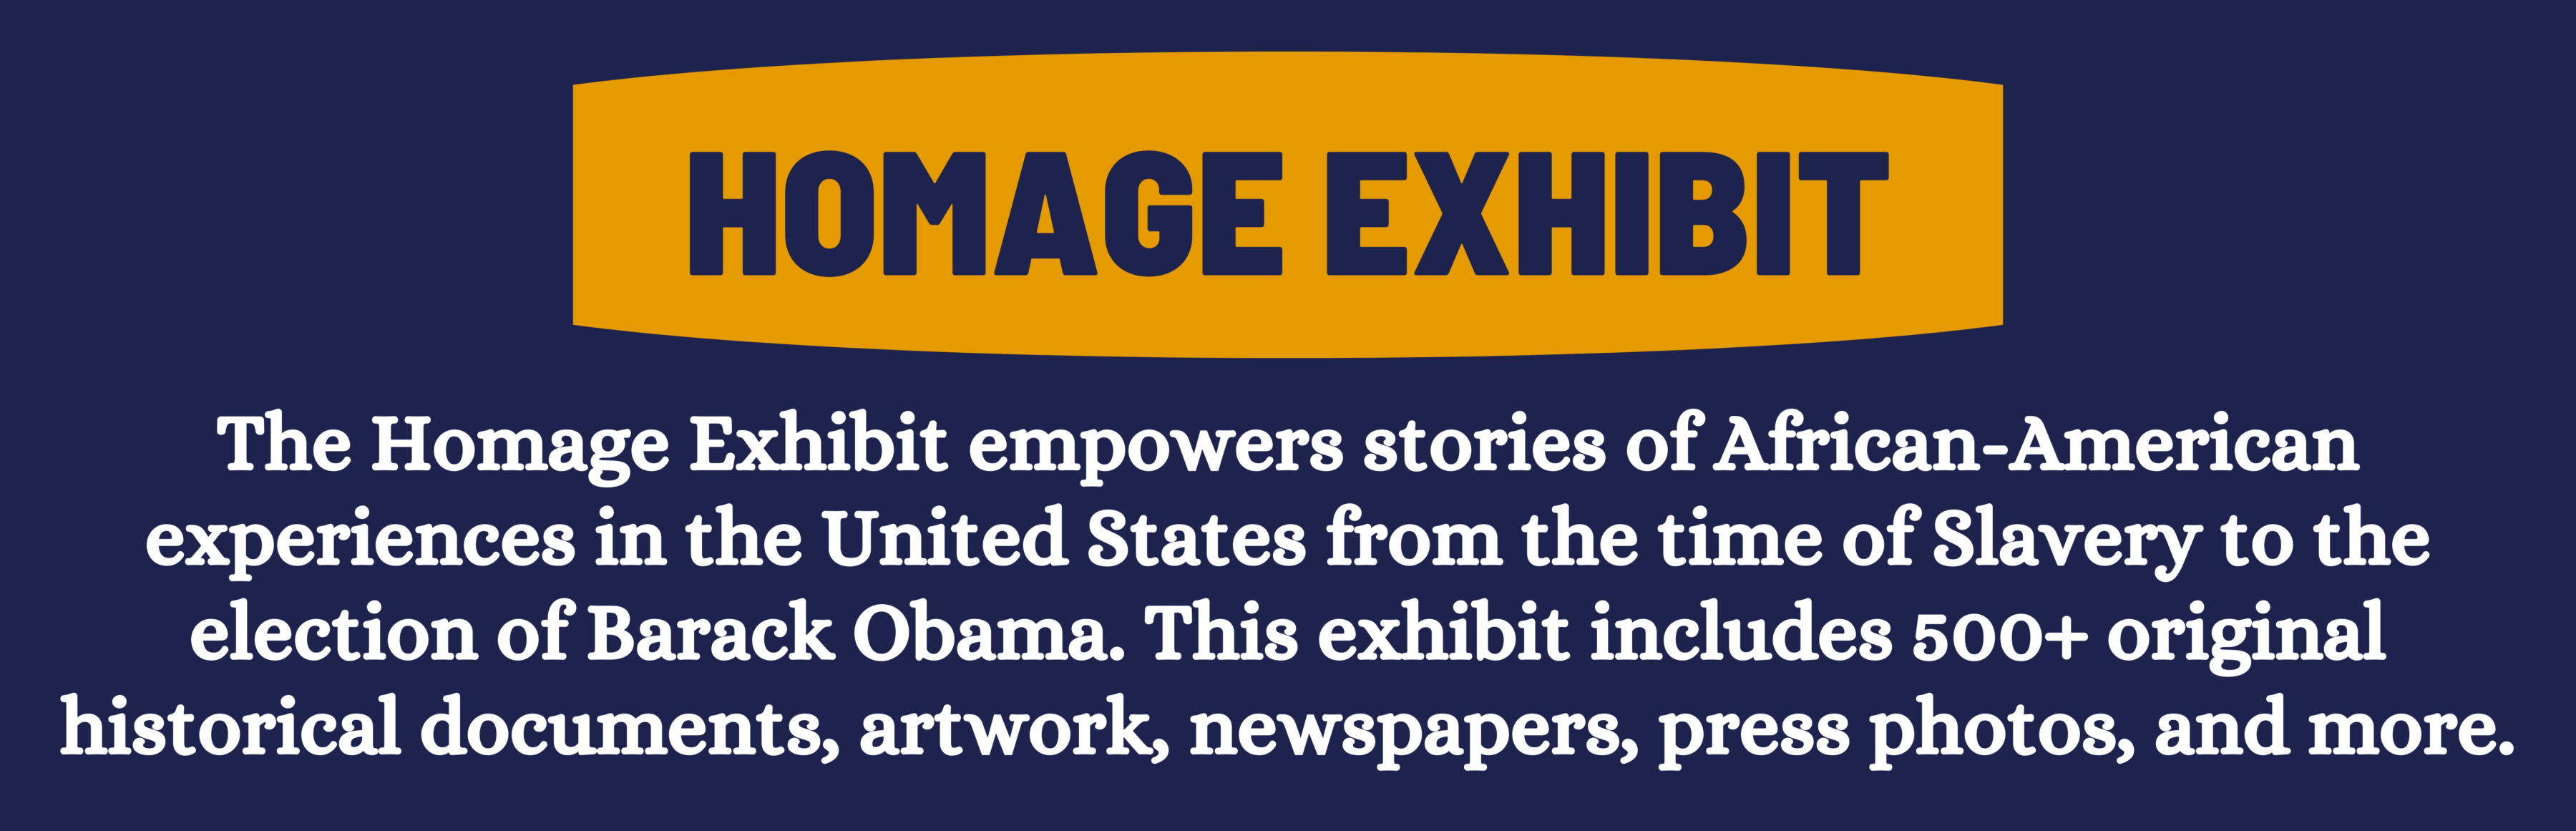 homage exhibit: The Homage Exhibit empowers stories of African-American experiences in the United States from the time of Slavery to the election of Barack Obama. This exhibit includes 500+ original historical documents, artwork, newspapers, press photos, and more.